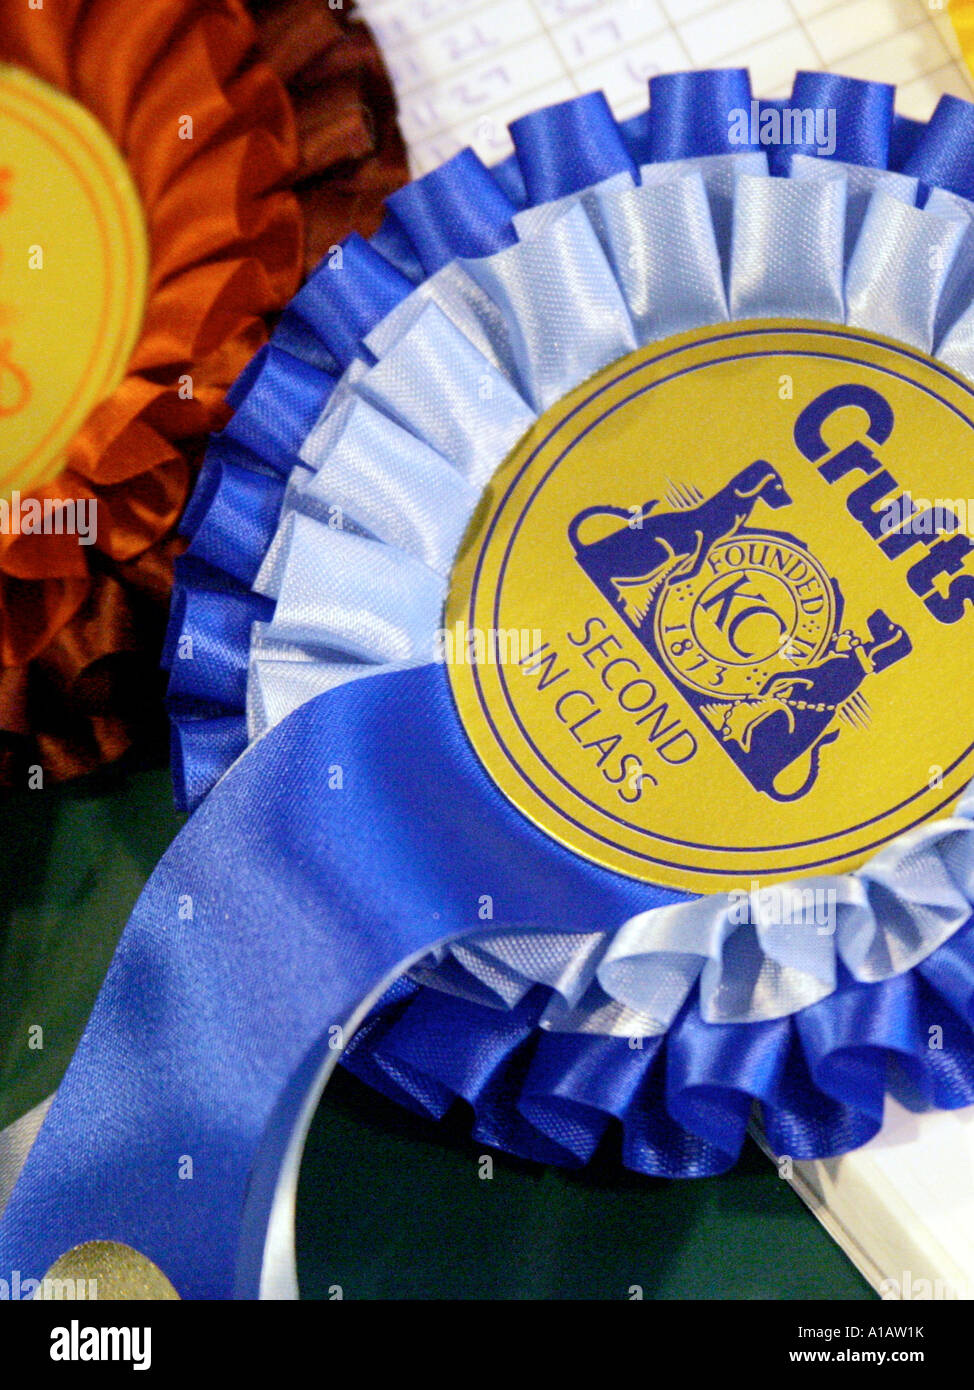 A rosette from Crufts 2008. Stock Photo